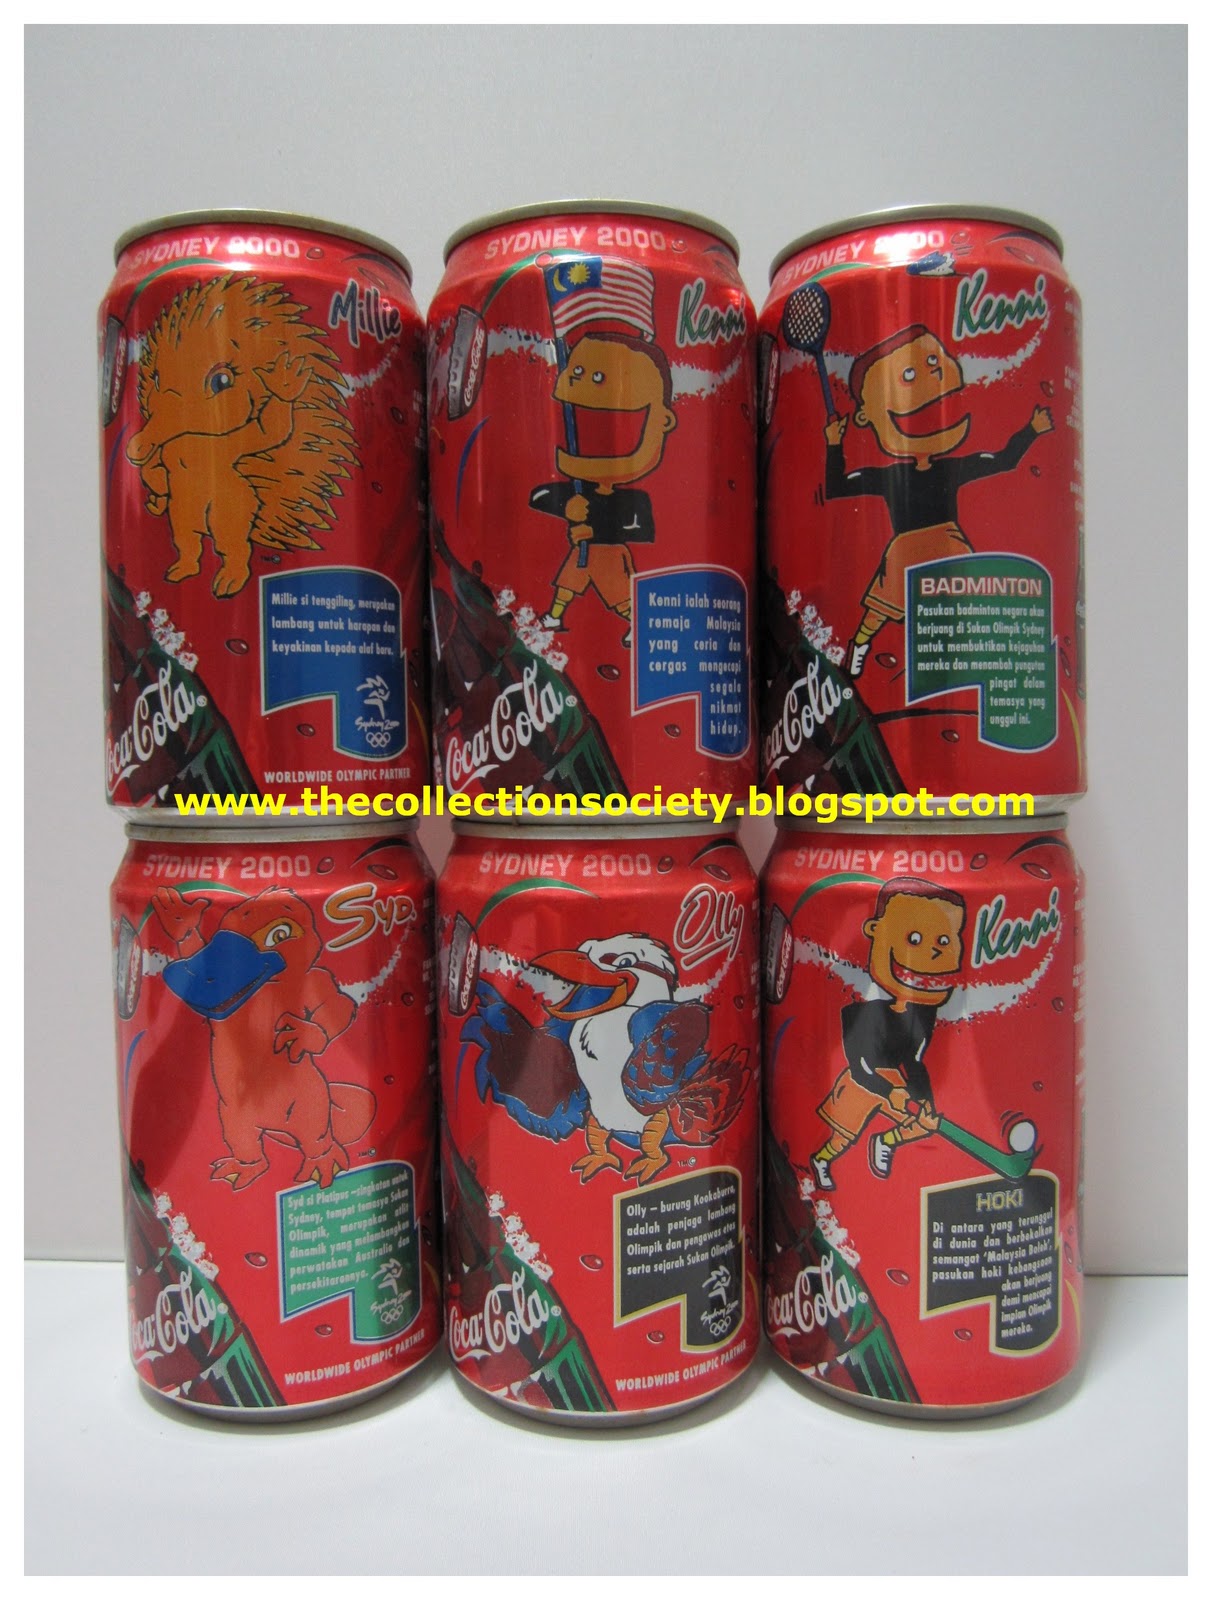 CokeExpo by TCS group: COCA COLA Olympic Games Sydney 2000 (6 Cans)